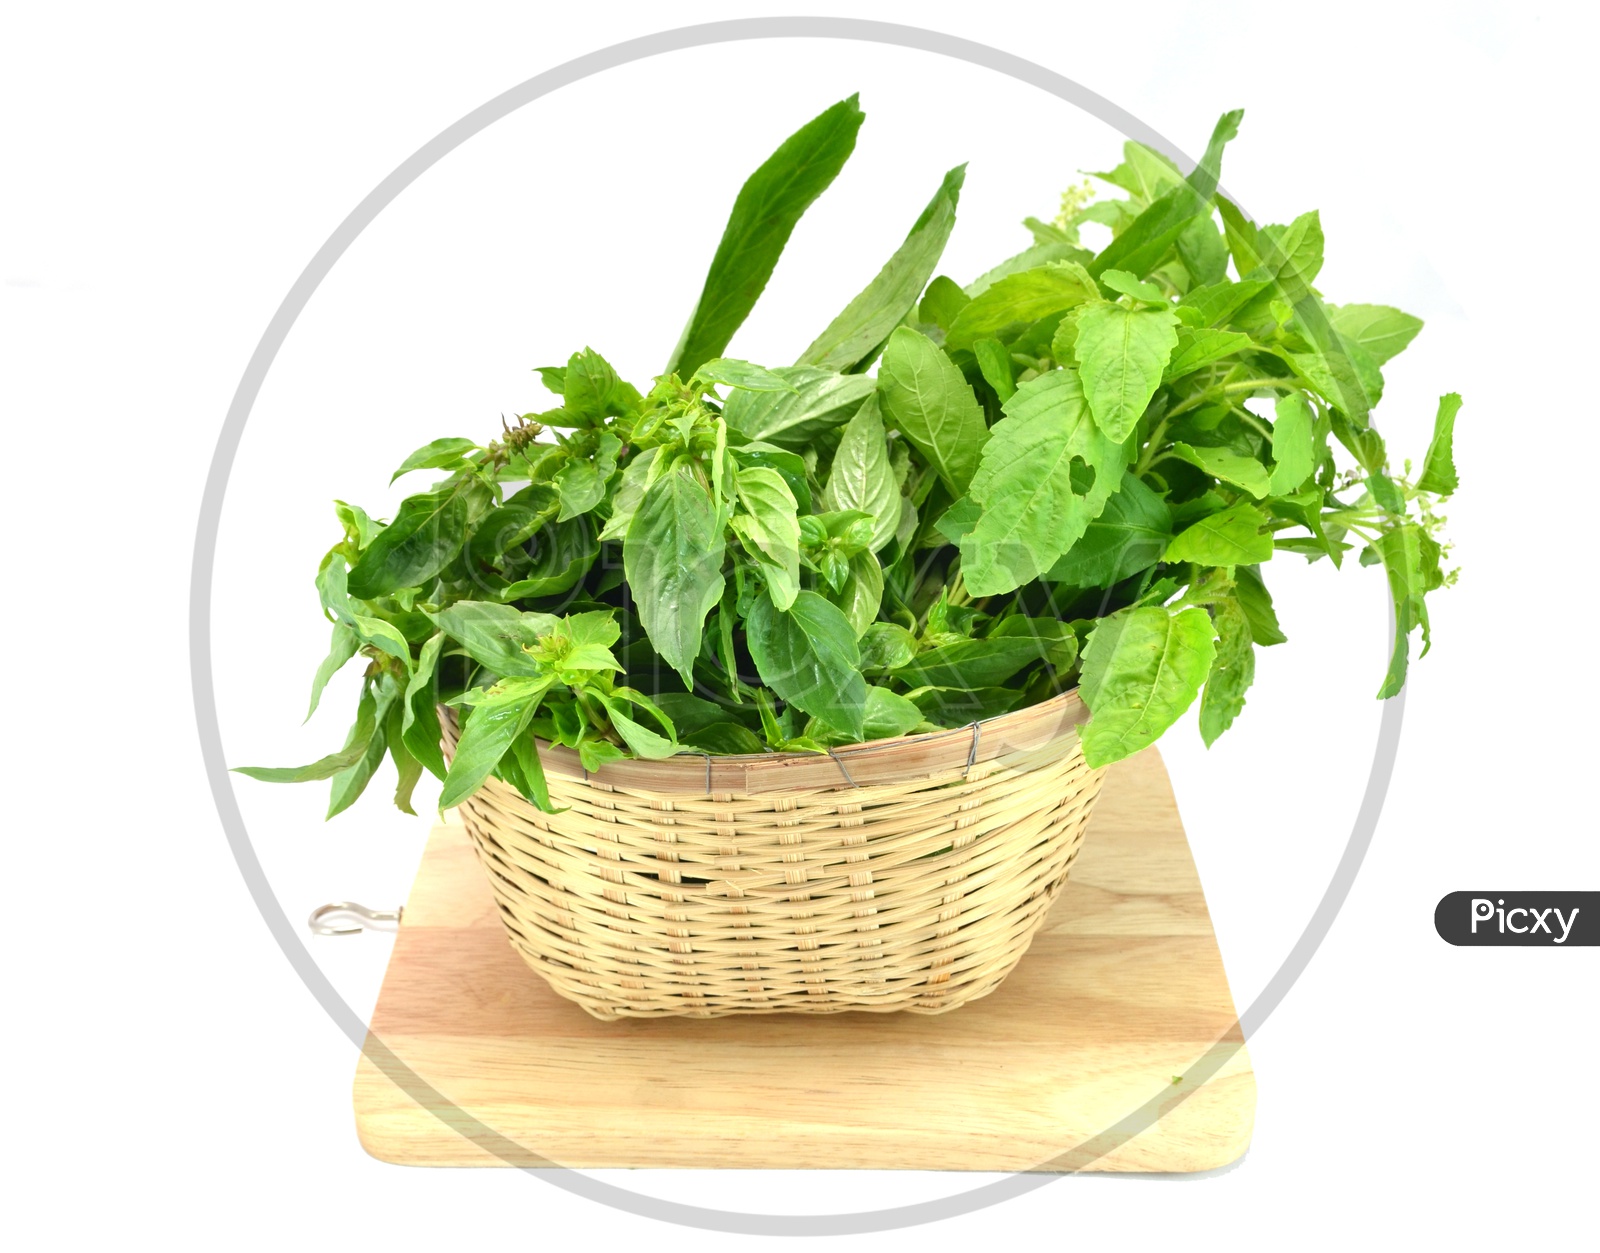 Fresh Green Leafy Vegetables in an Wooden Weaved Basked On an isolated White Background